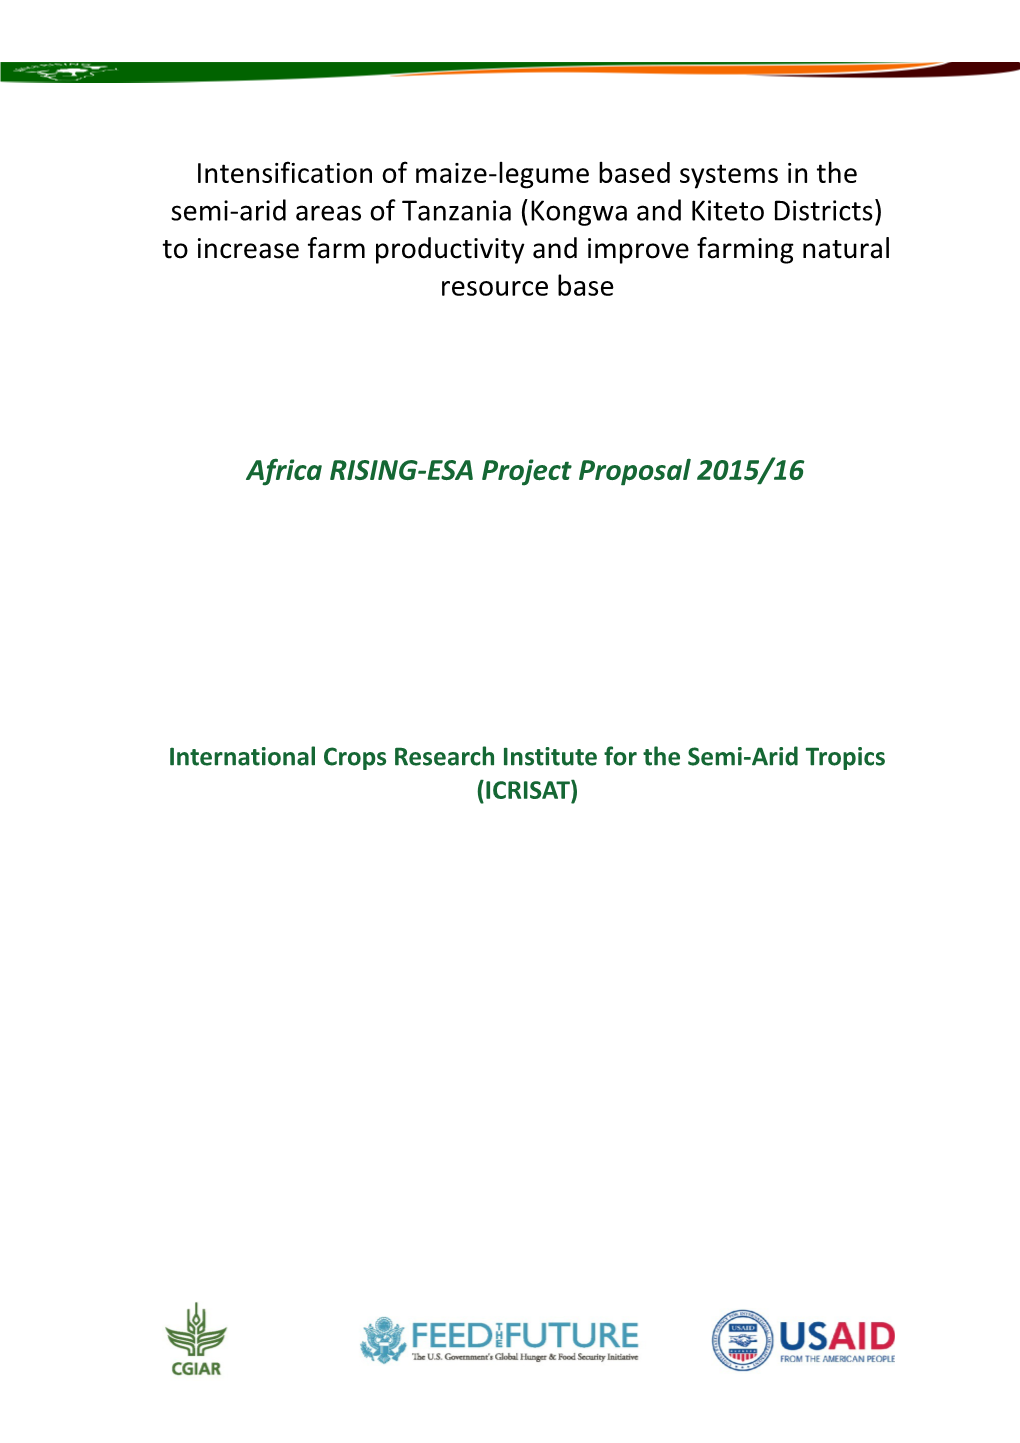 Africa RISING-ESA Project Proposal 2015/16